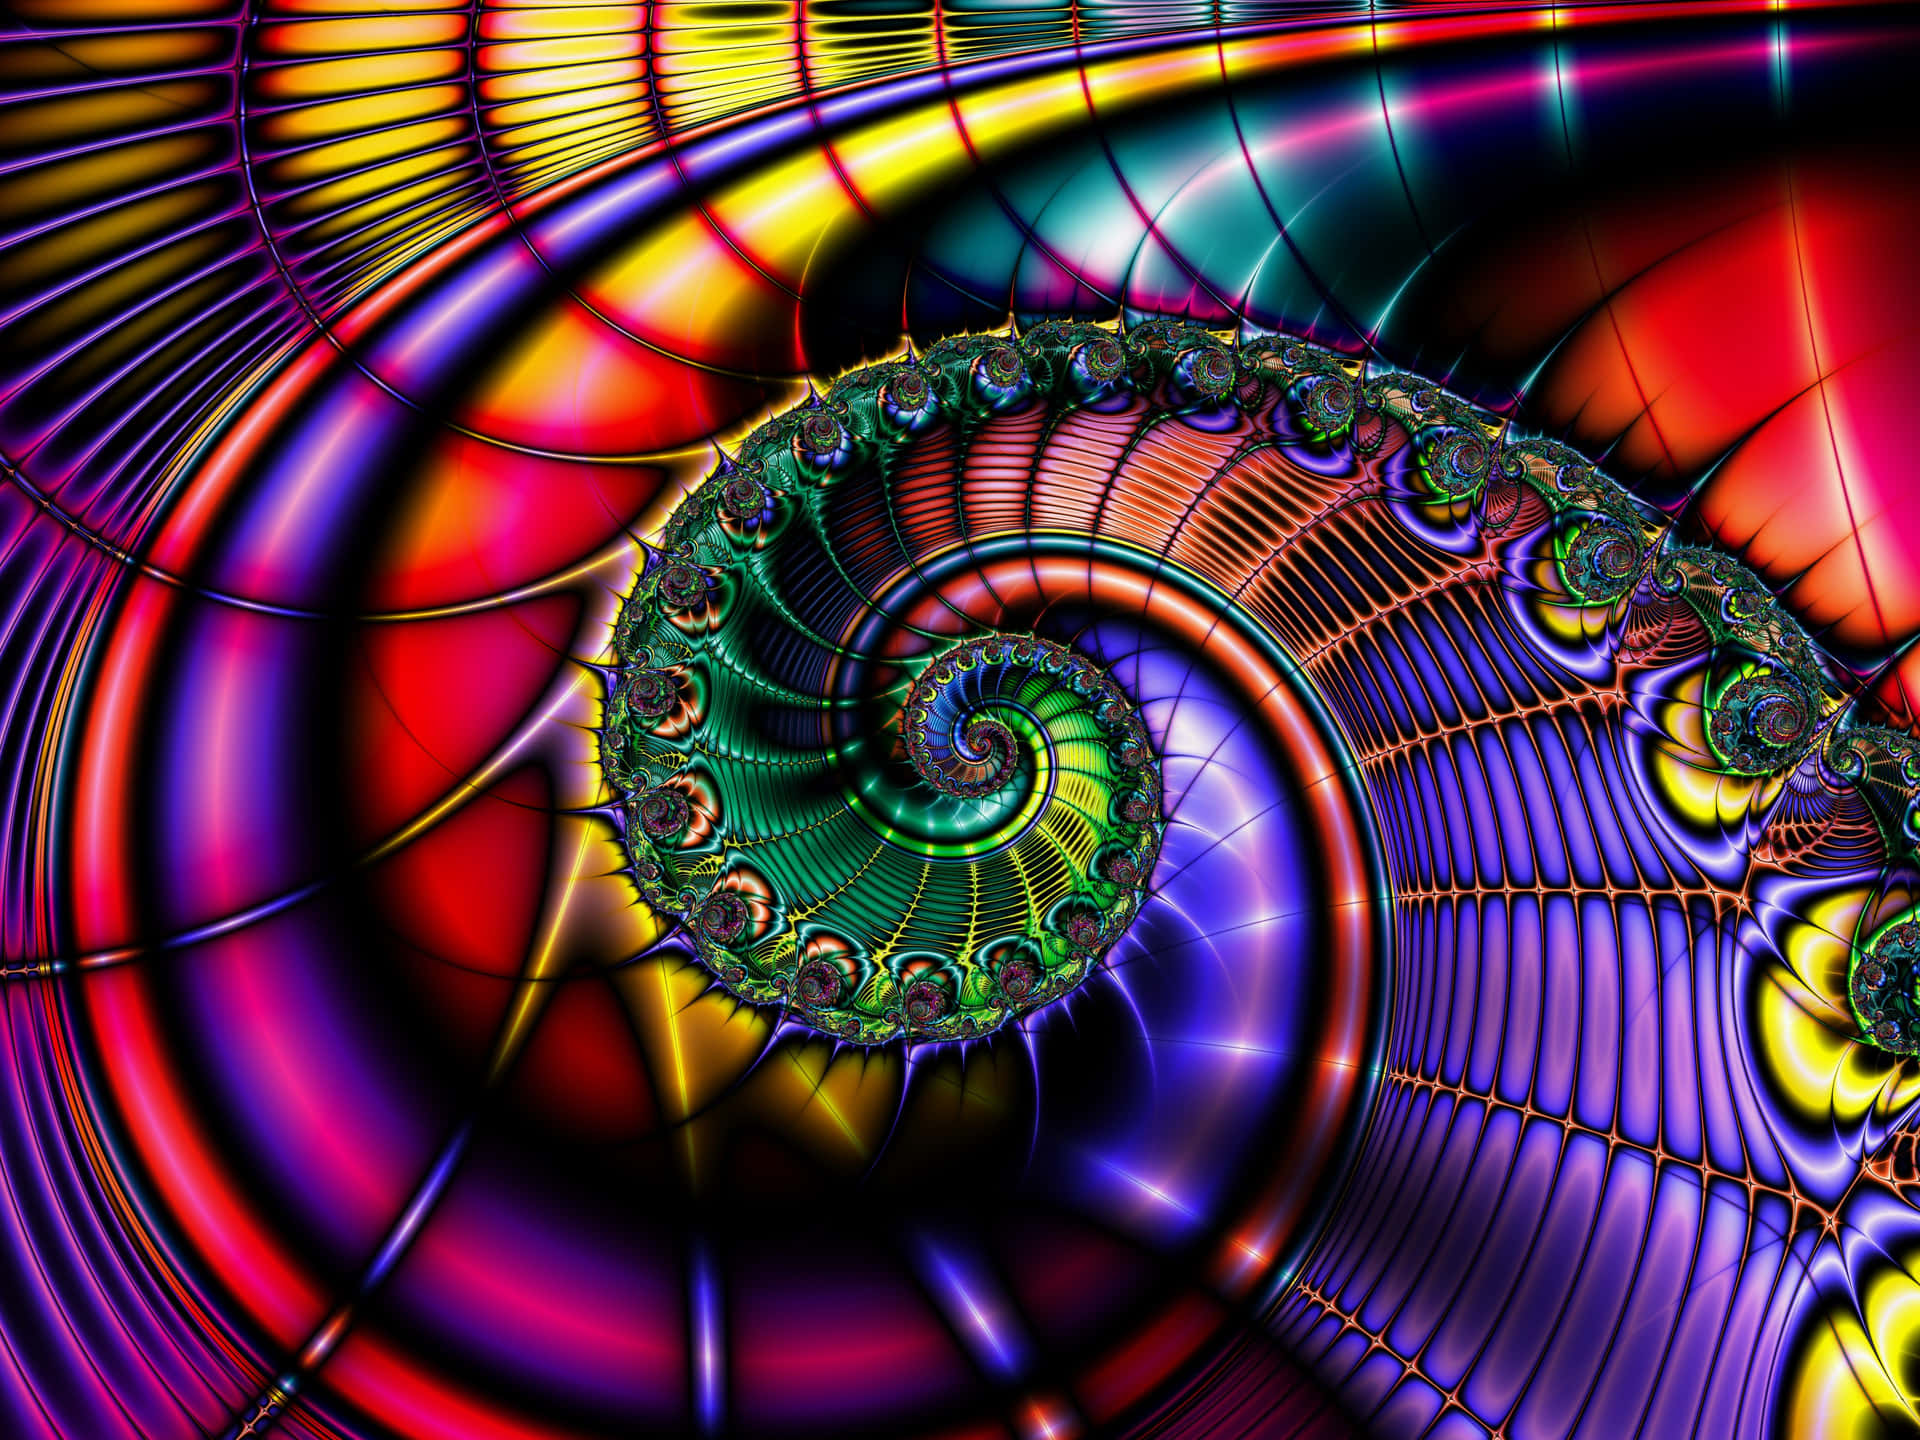 Explore the intricate intricacies of mathematics with this mesmerizing fractal design. Wallpaper